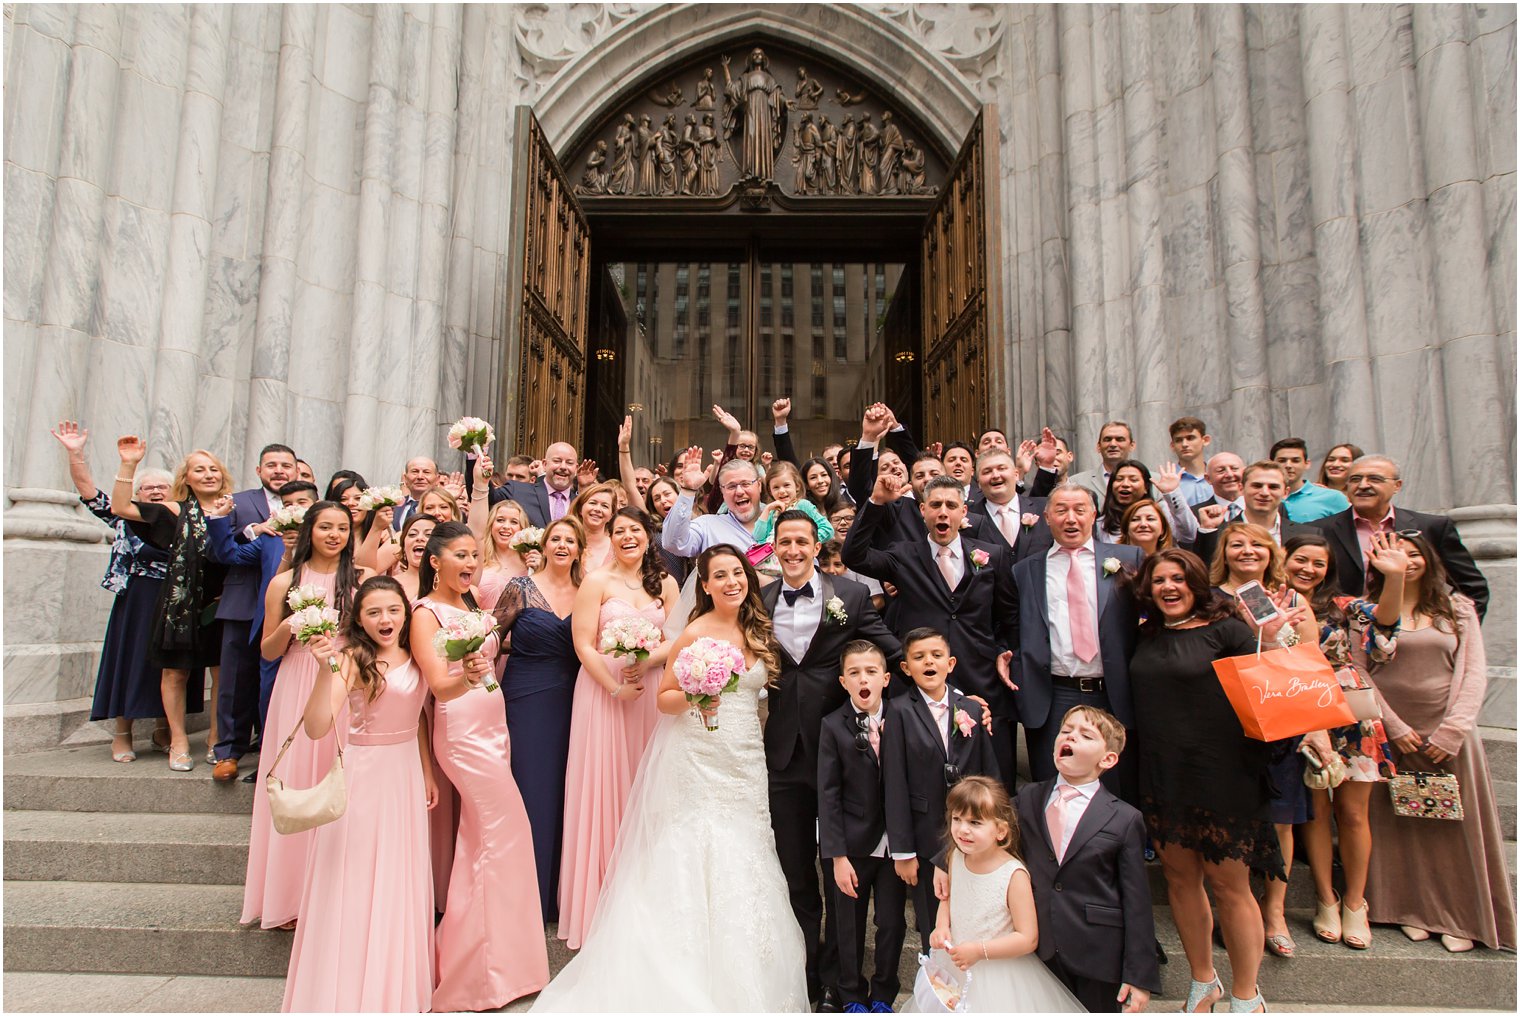 Group photo at St. Patrick's Cathedral | Photo by Idalia Photography